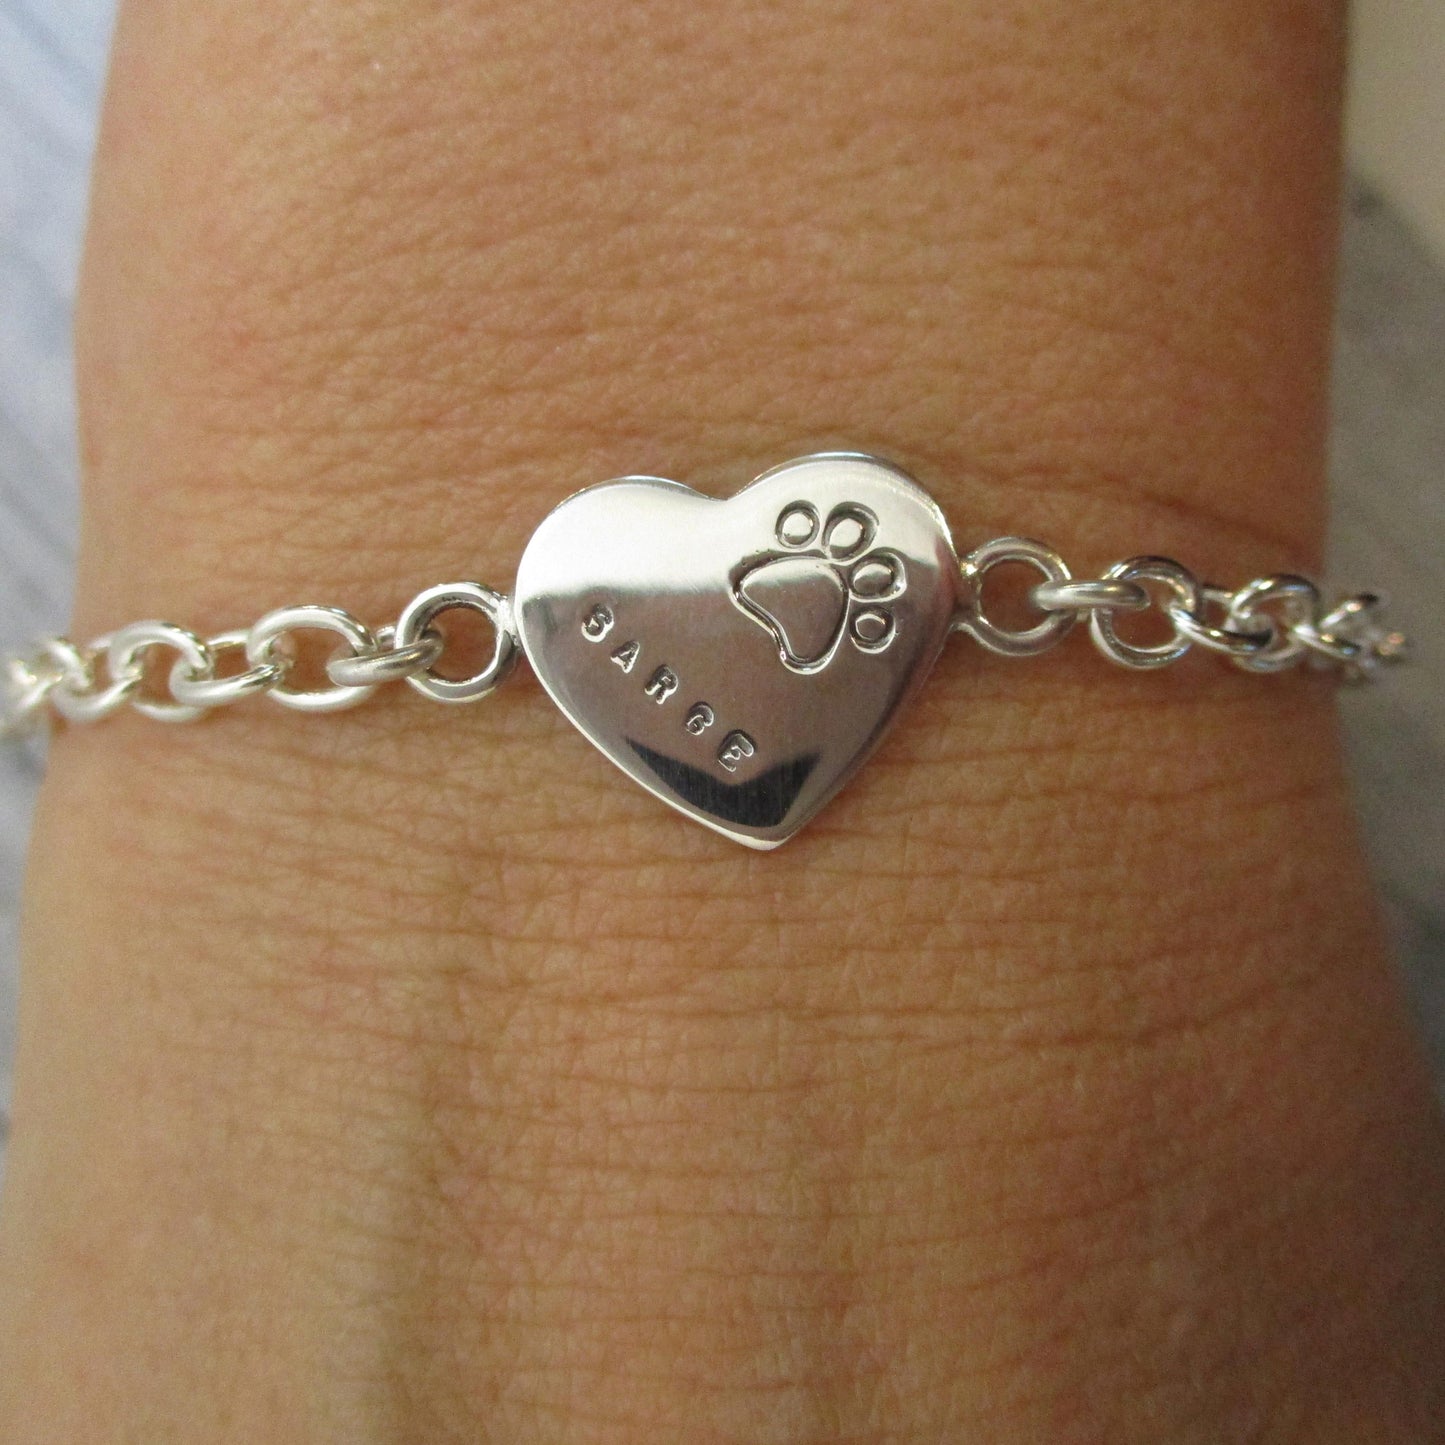 Load image into Gallery viewer, Personalized Heart Paw Bracelet in Sterling Silver - Luxe Design Jewellery
